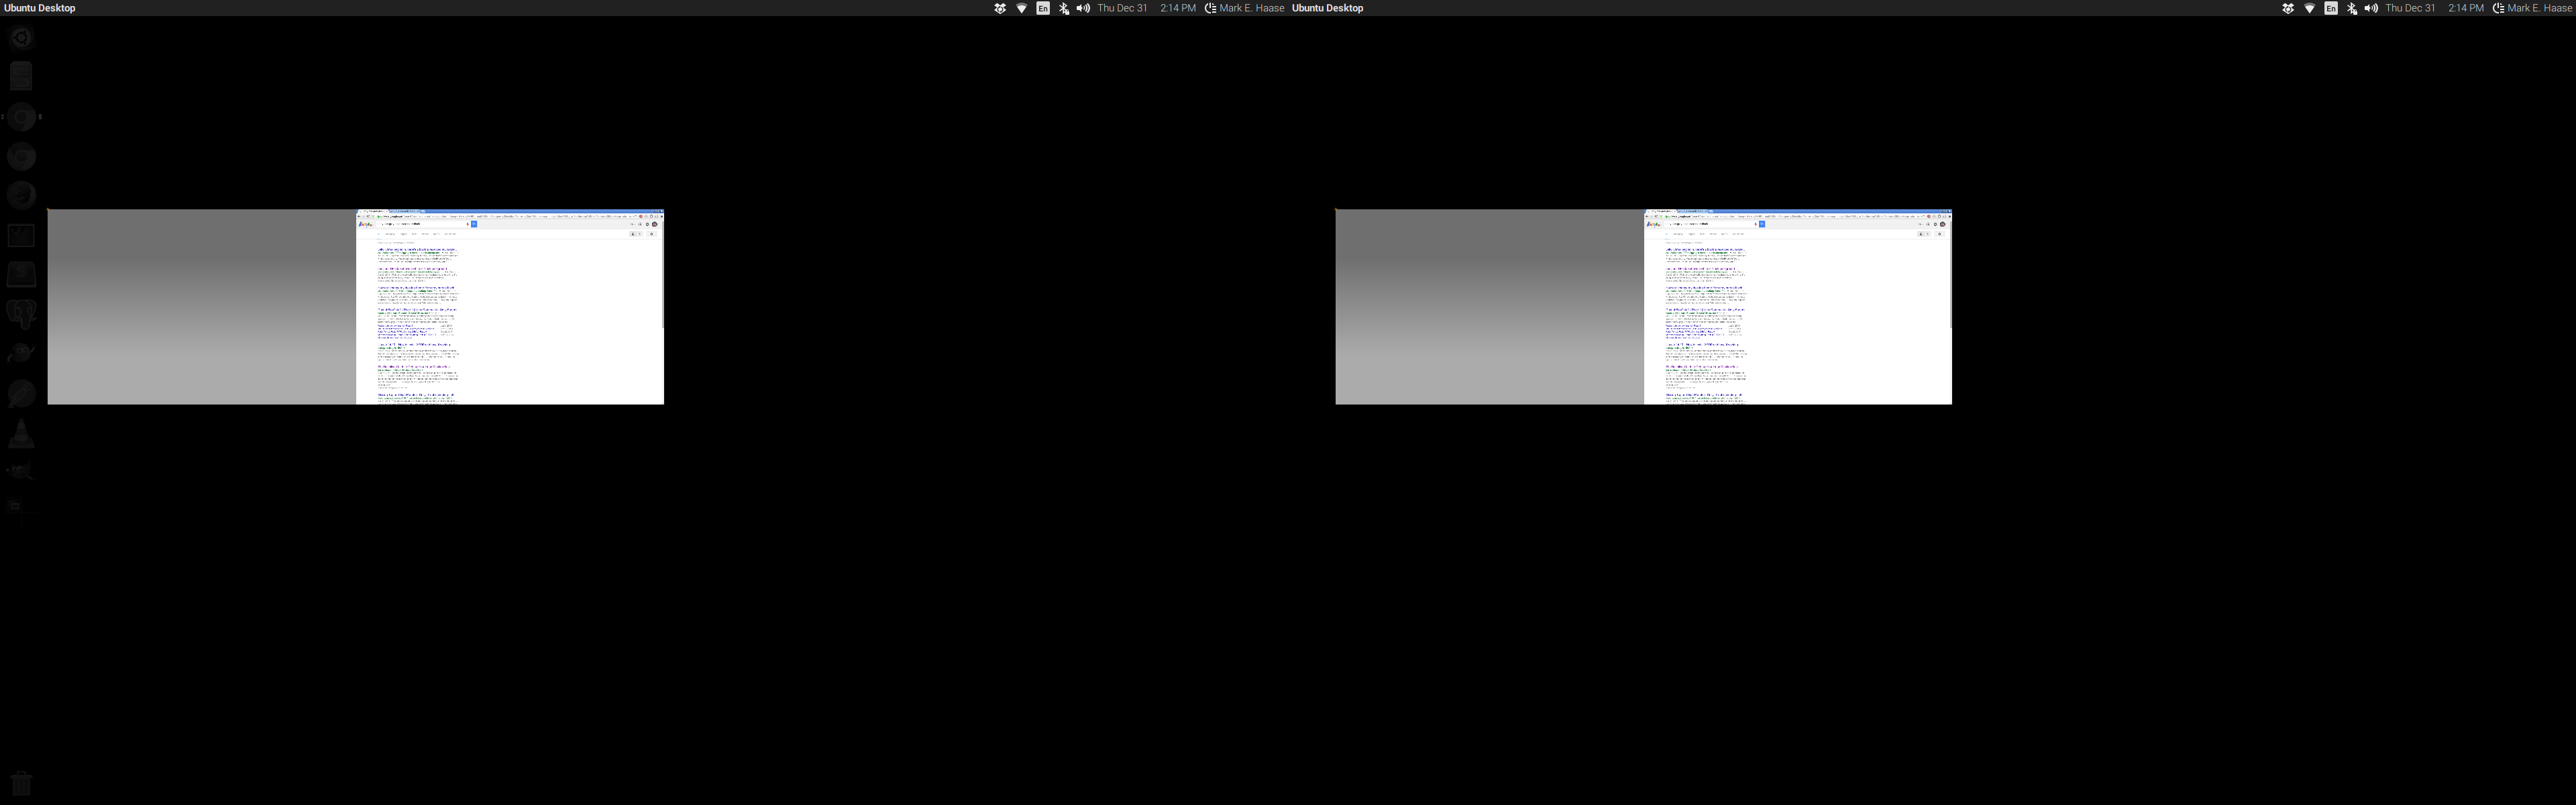 The First Virtual Desktop Has A Gray Gradient Background And Other